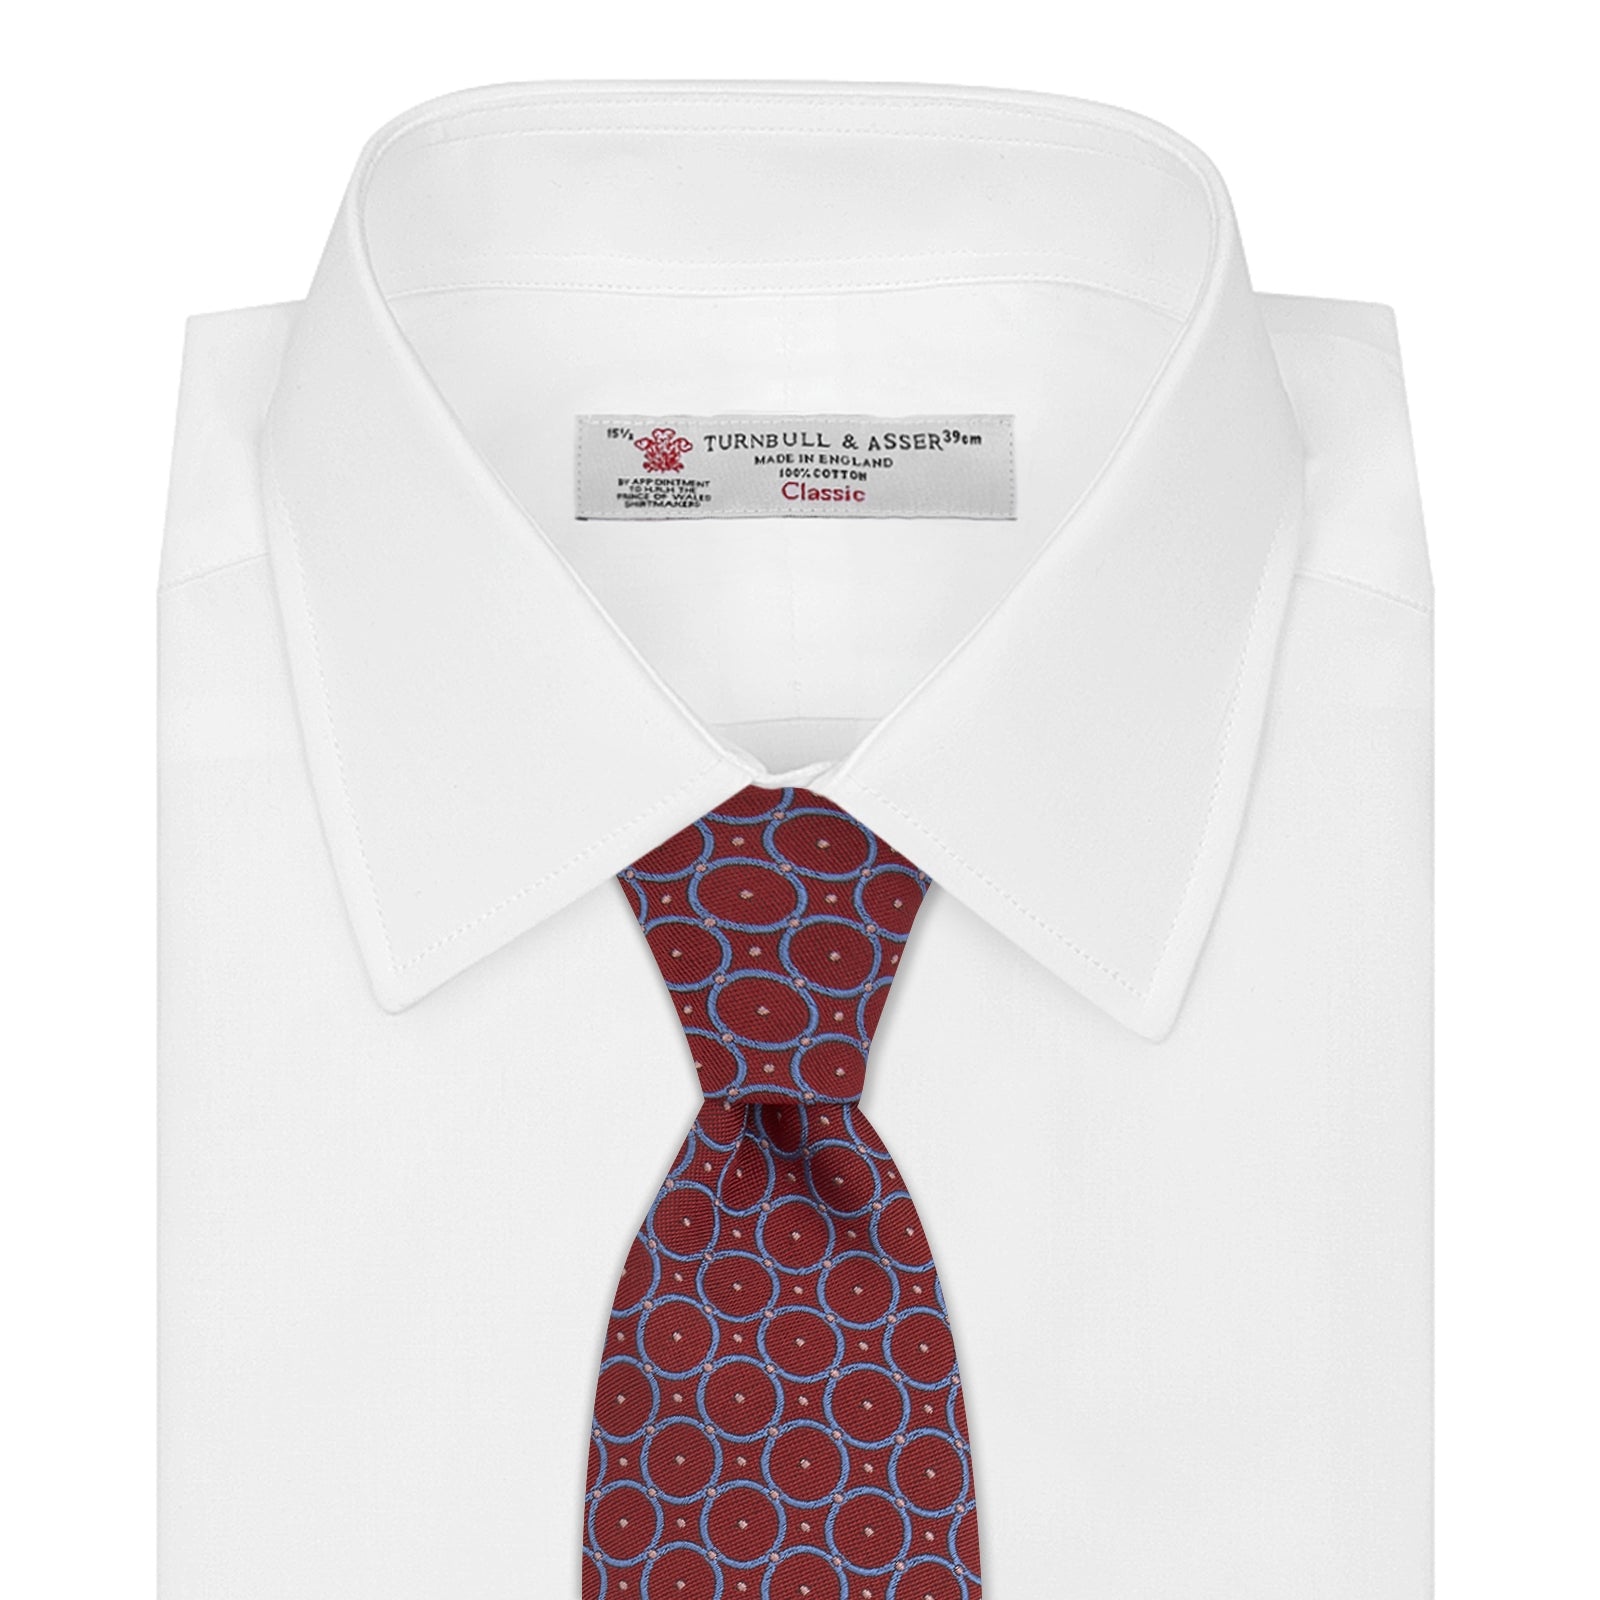 Red and Blue Shield Silk Tie